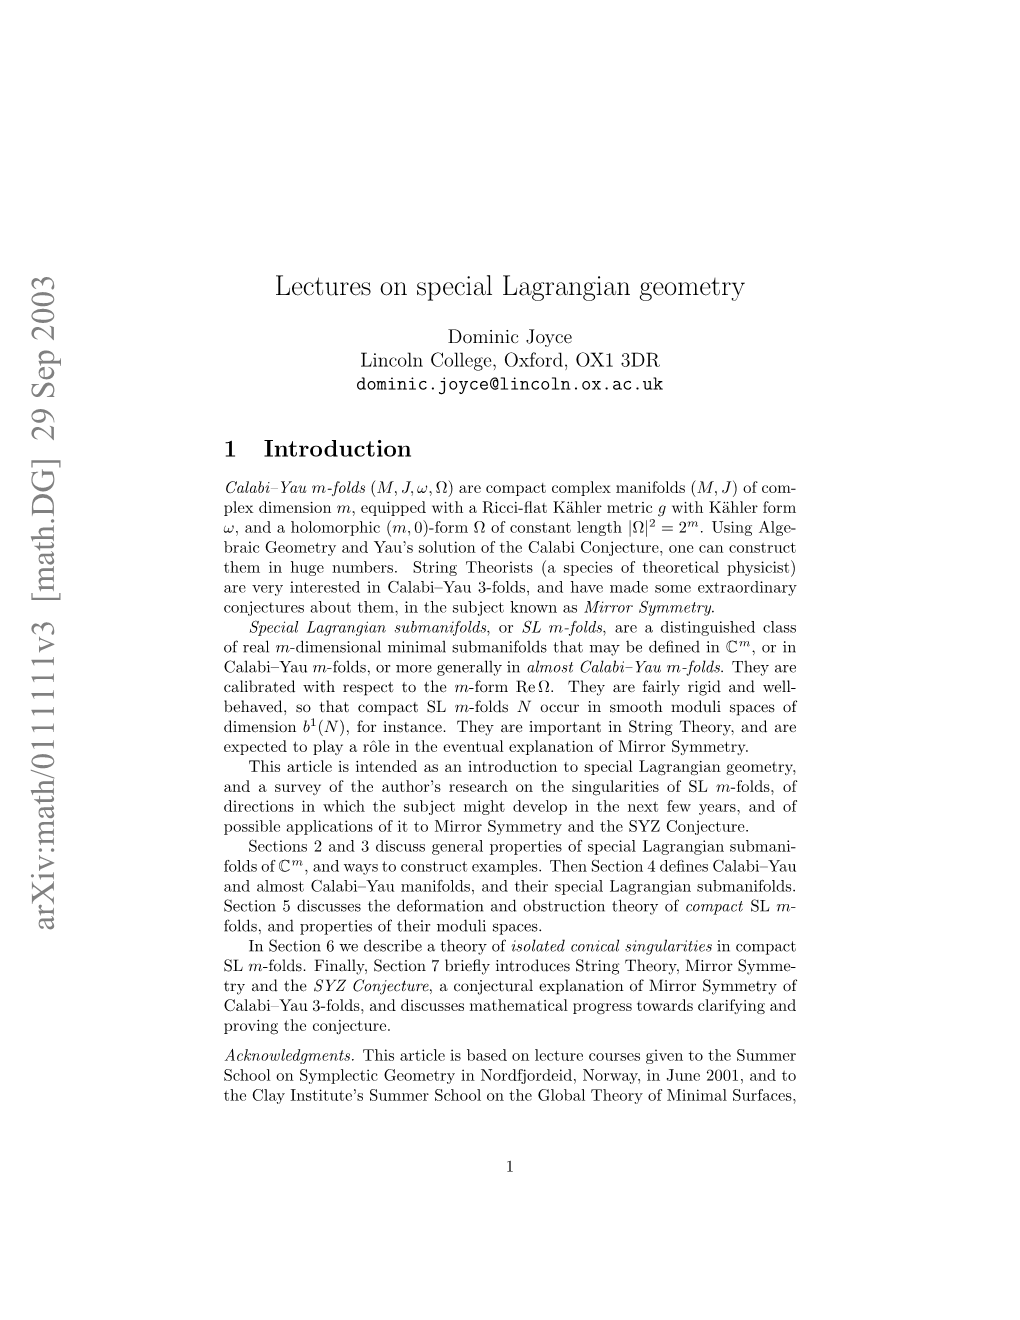 Lectures on Special Lagrangian Geometry